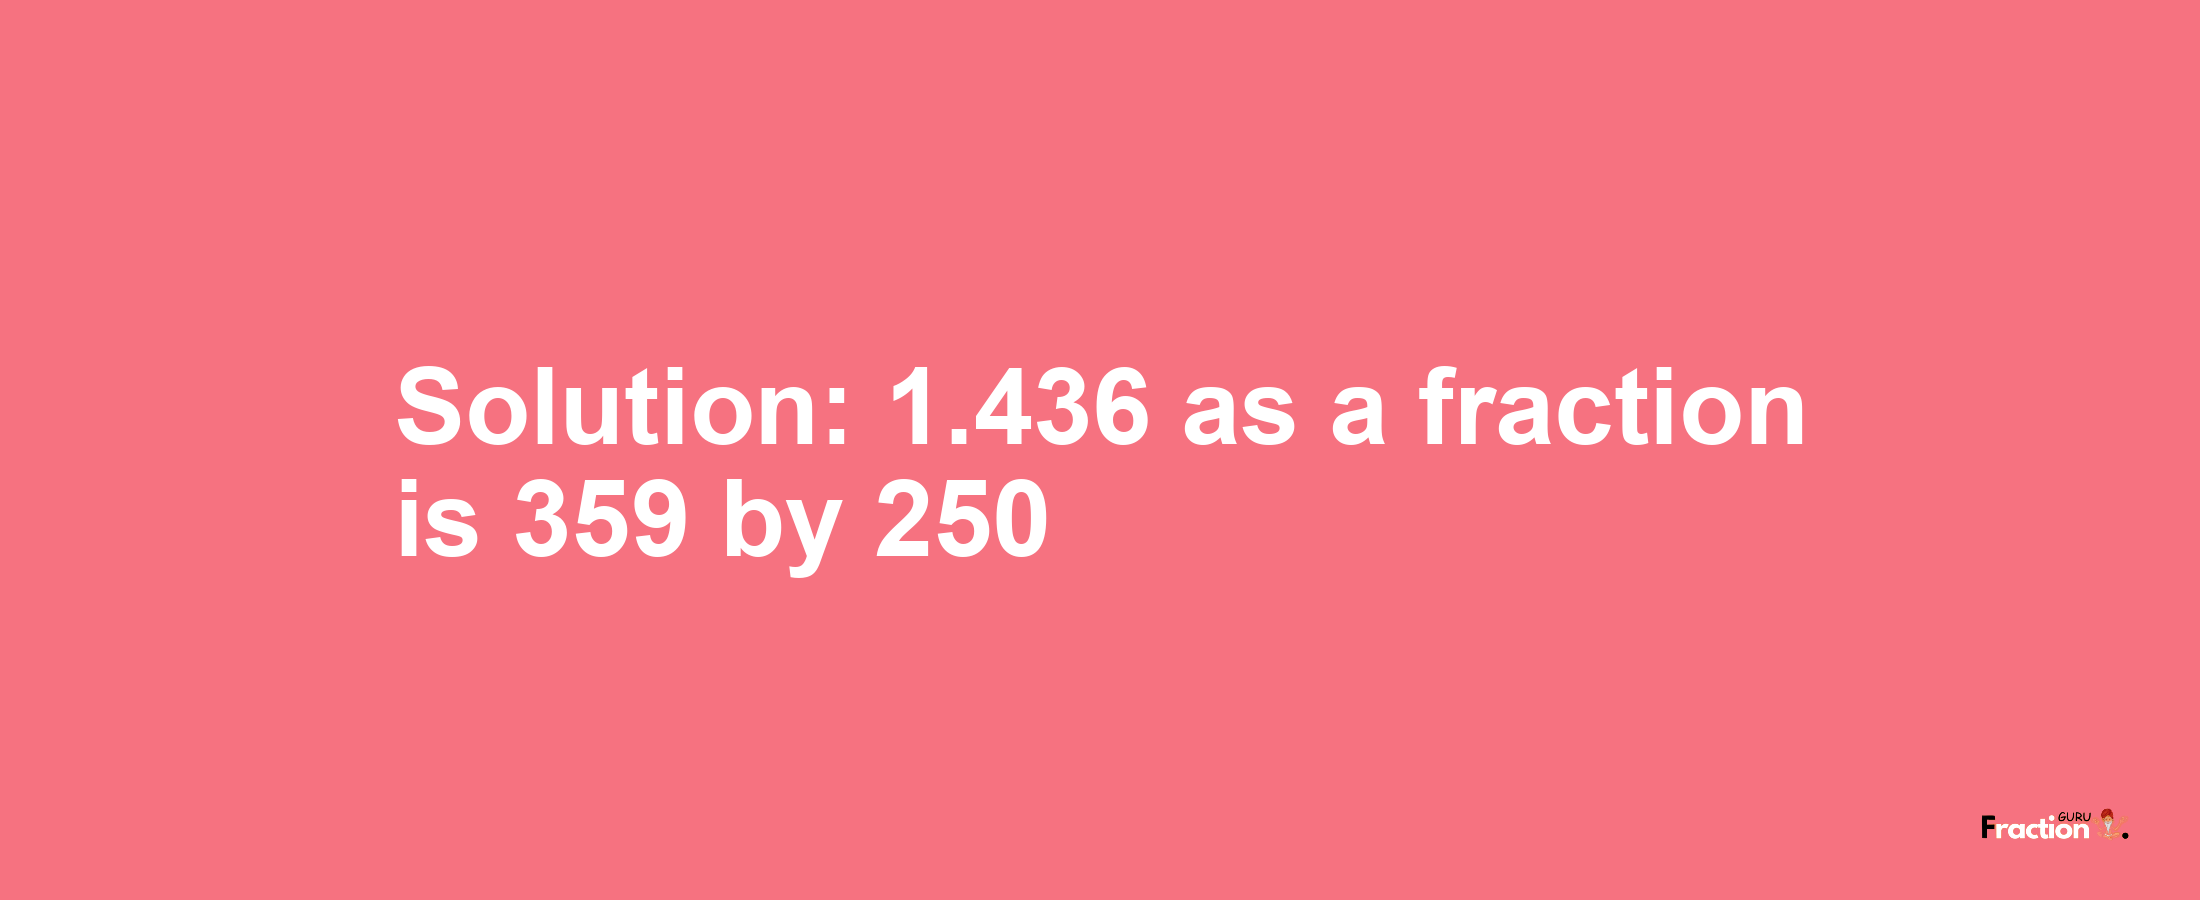 Solution:1.436 as a fraction is 359/250